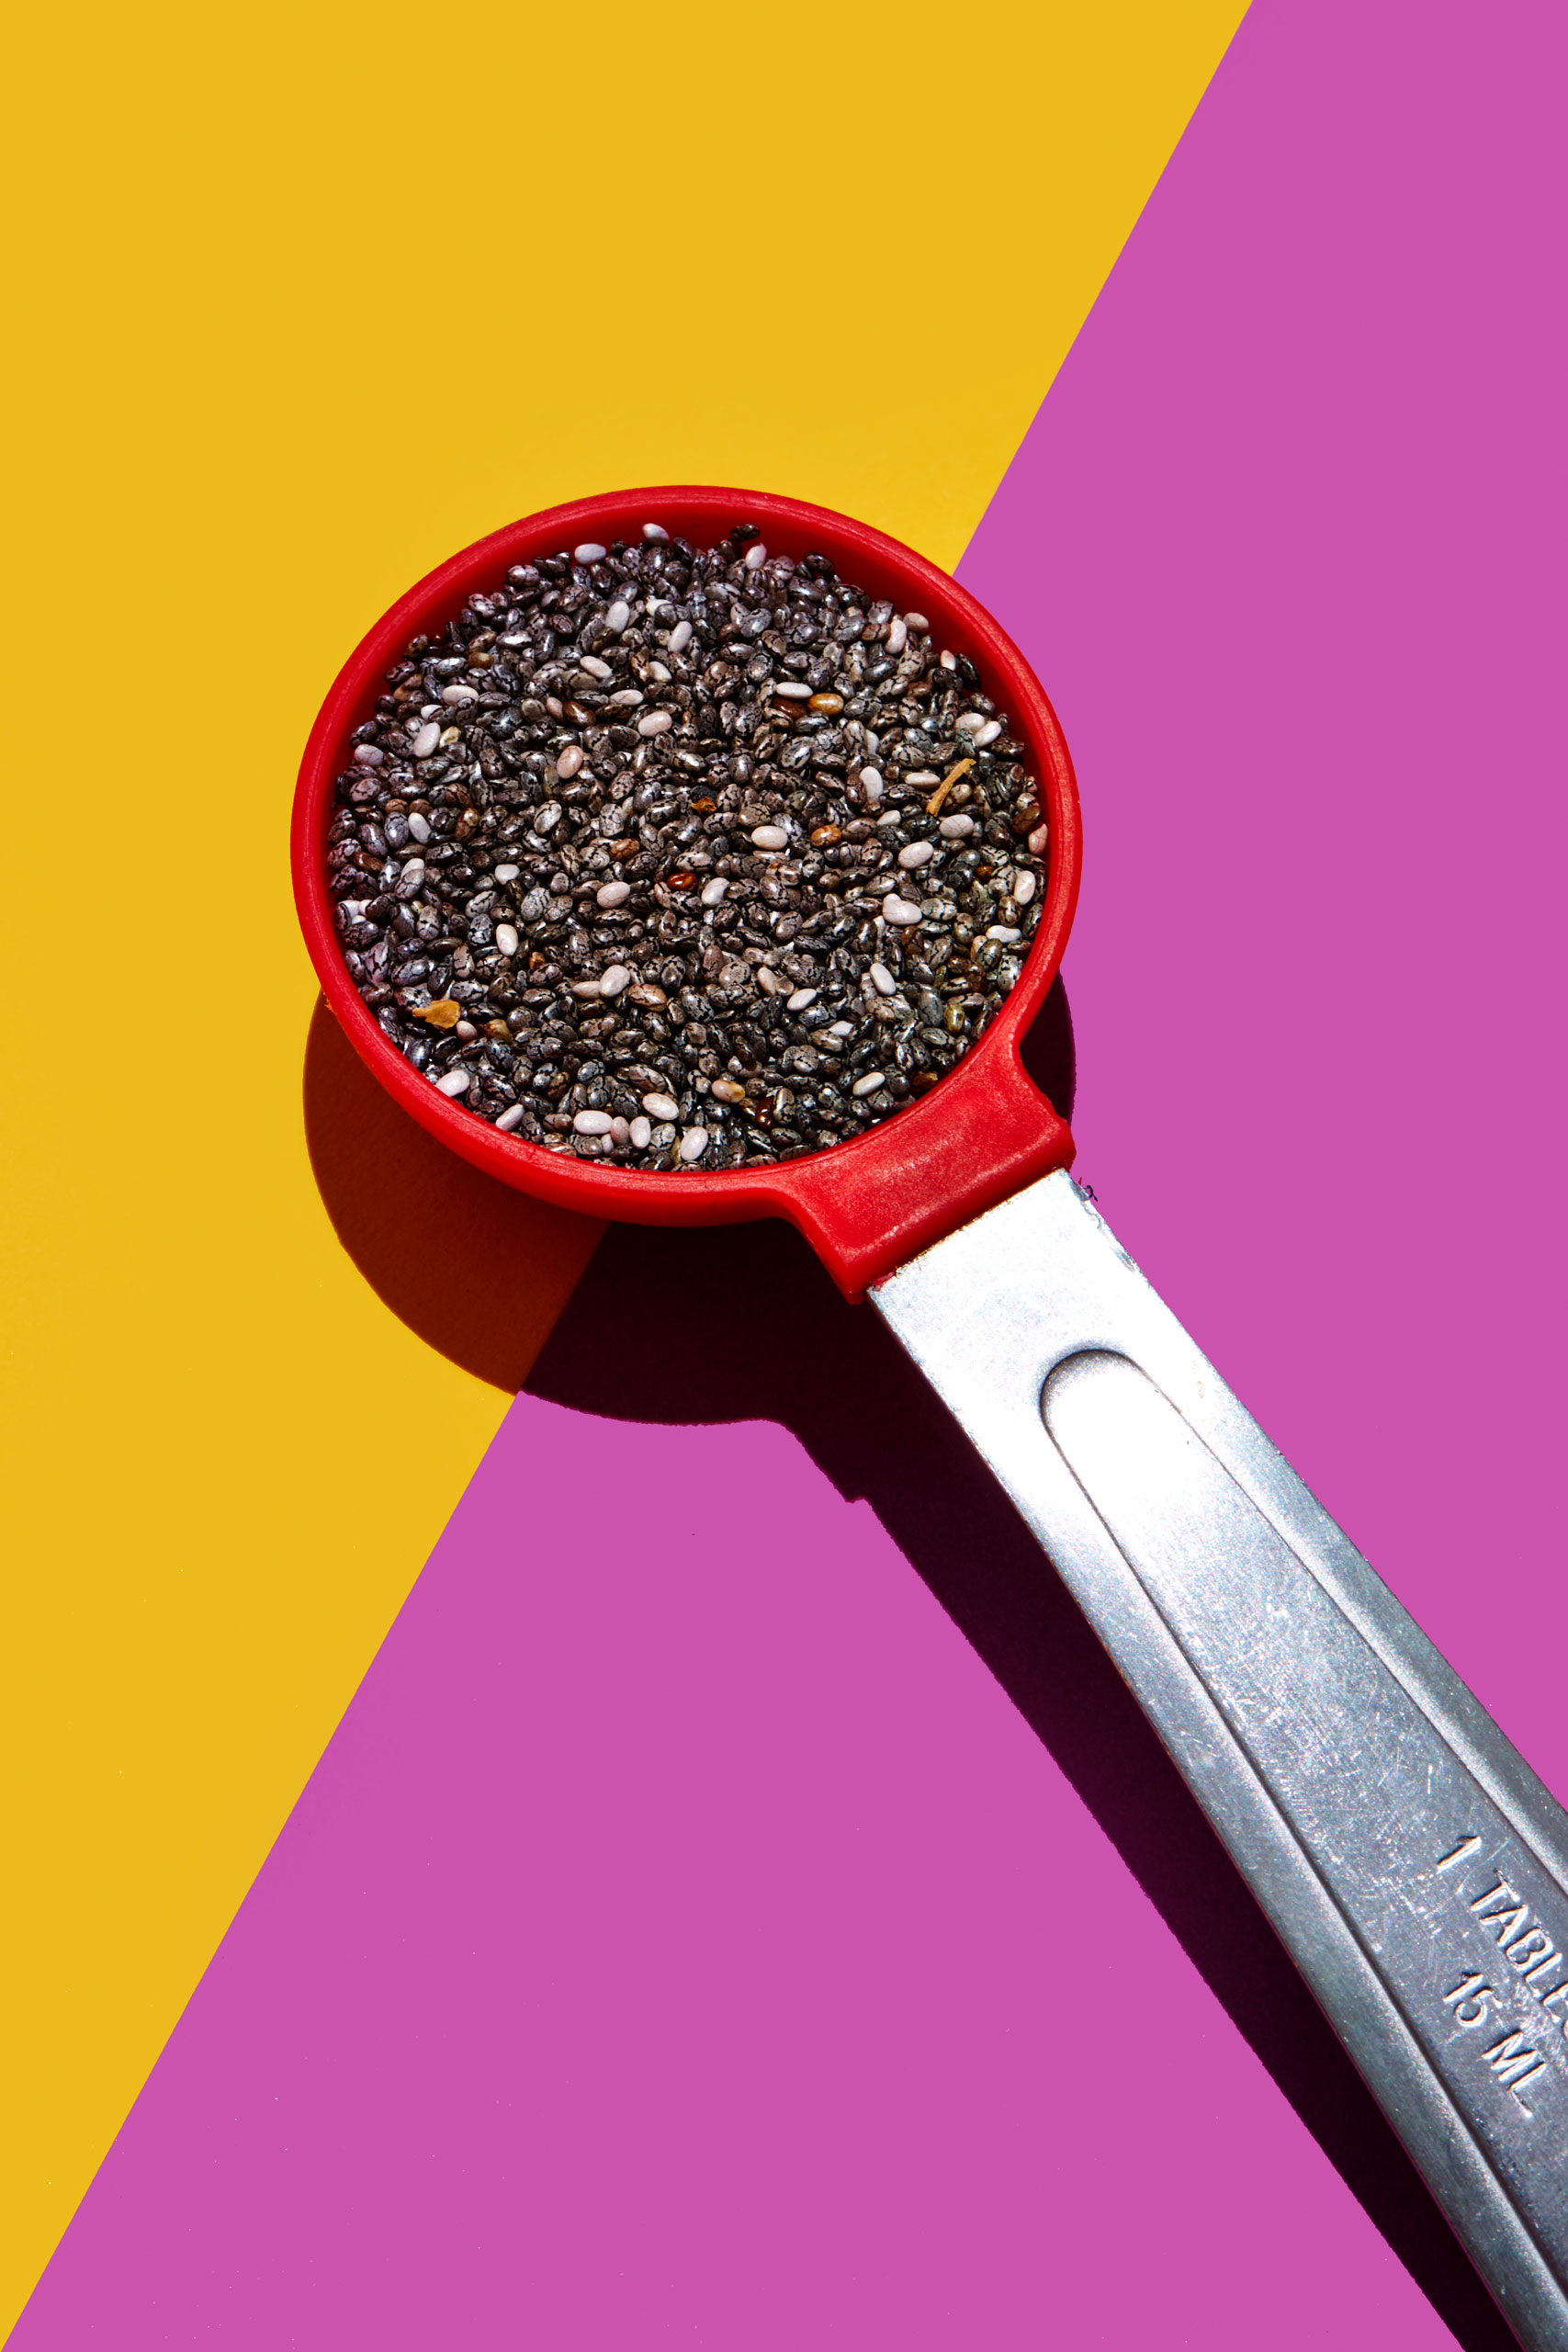 healthiest foods, health food, diet, nutrition, time.com stock, chia seeds